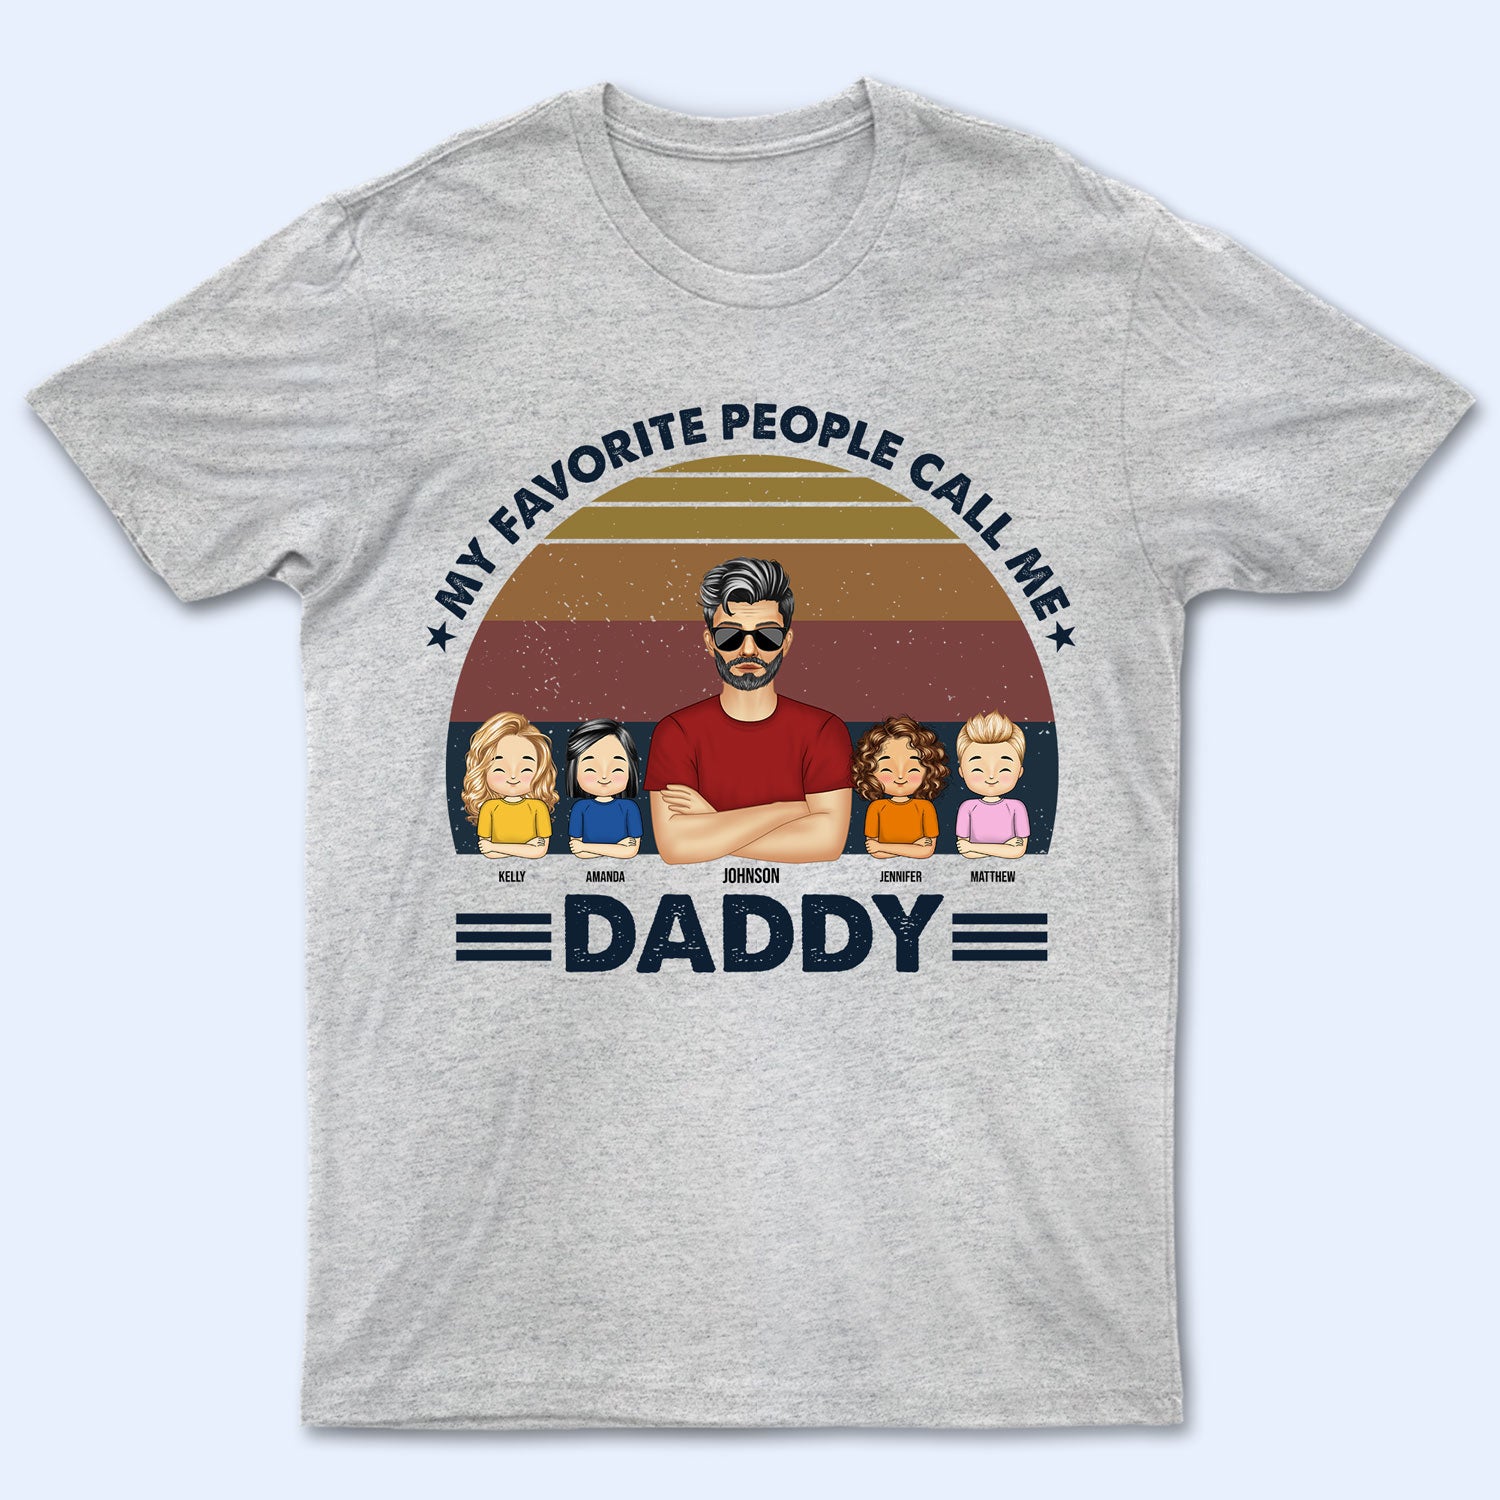 Call Me Daddy - Gift For Dad, Father - Personalized Custom T Shirt